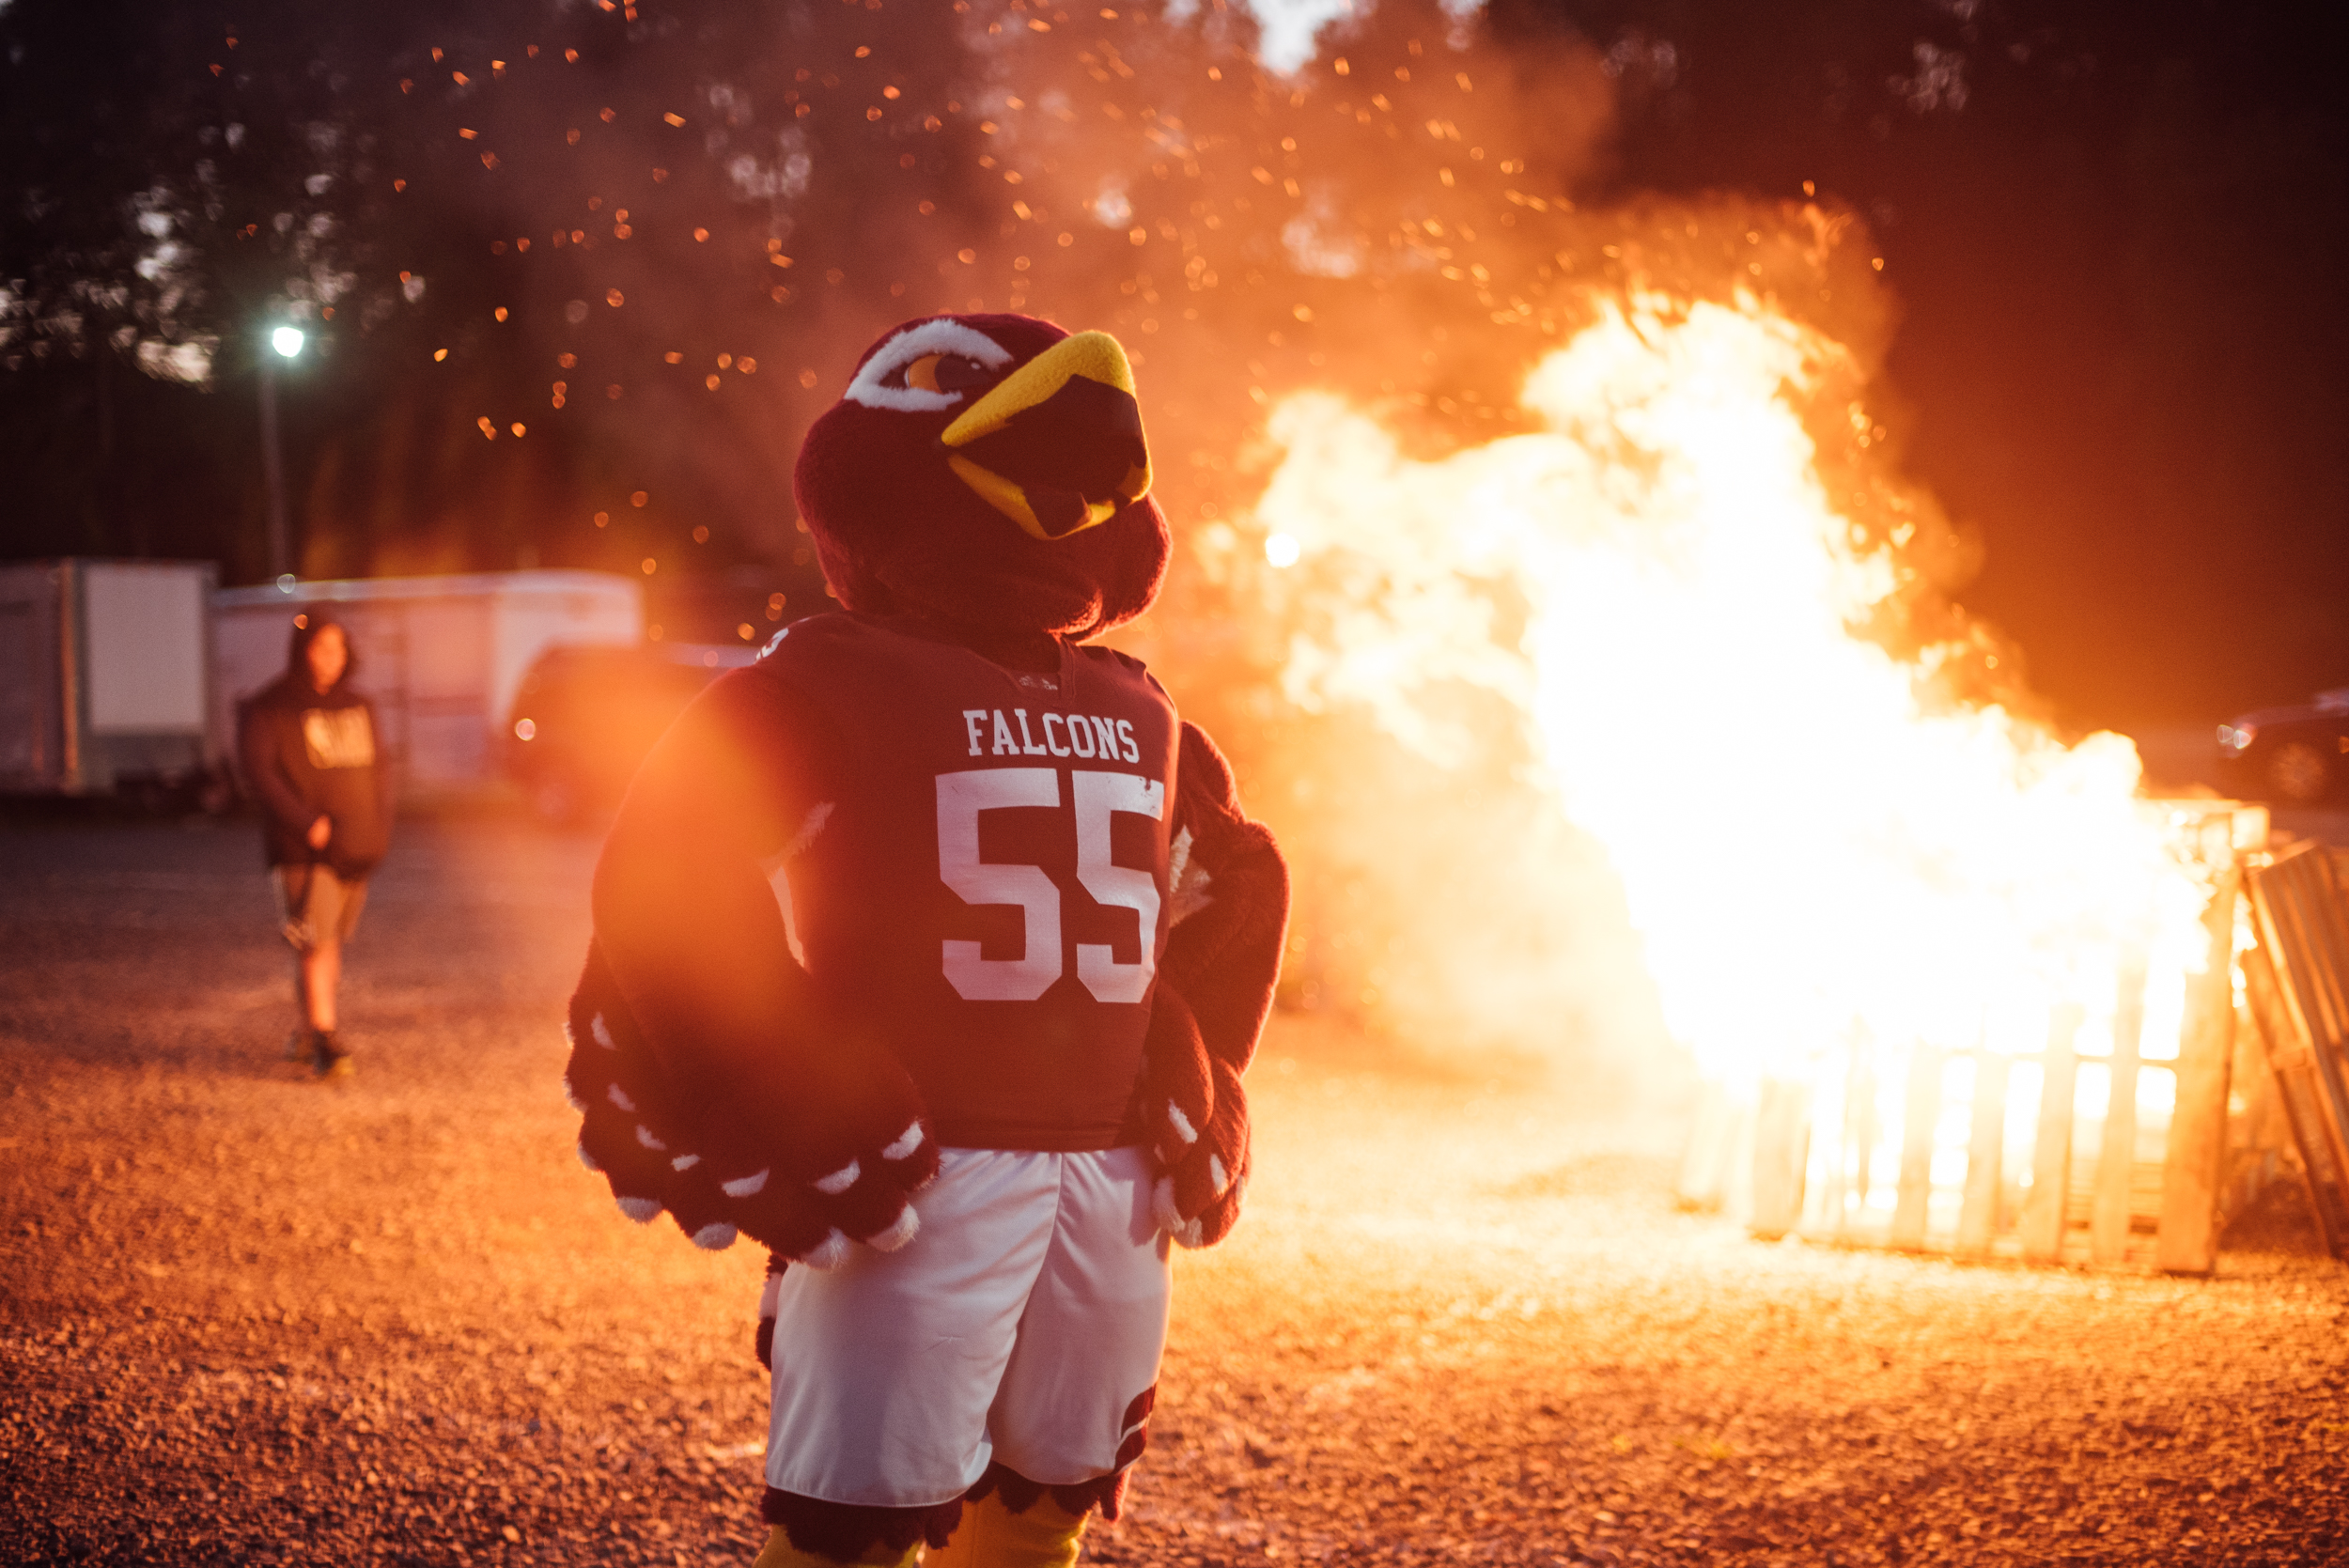 The FSU mascot, Freddie the Falcon, stands in front of a blazing bonfire at night